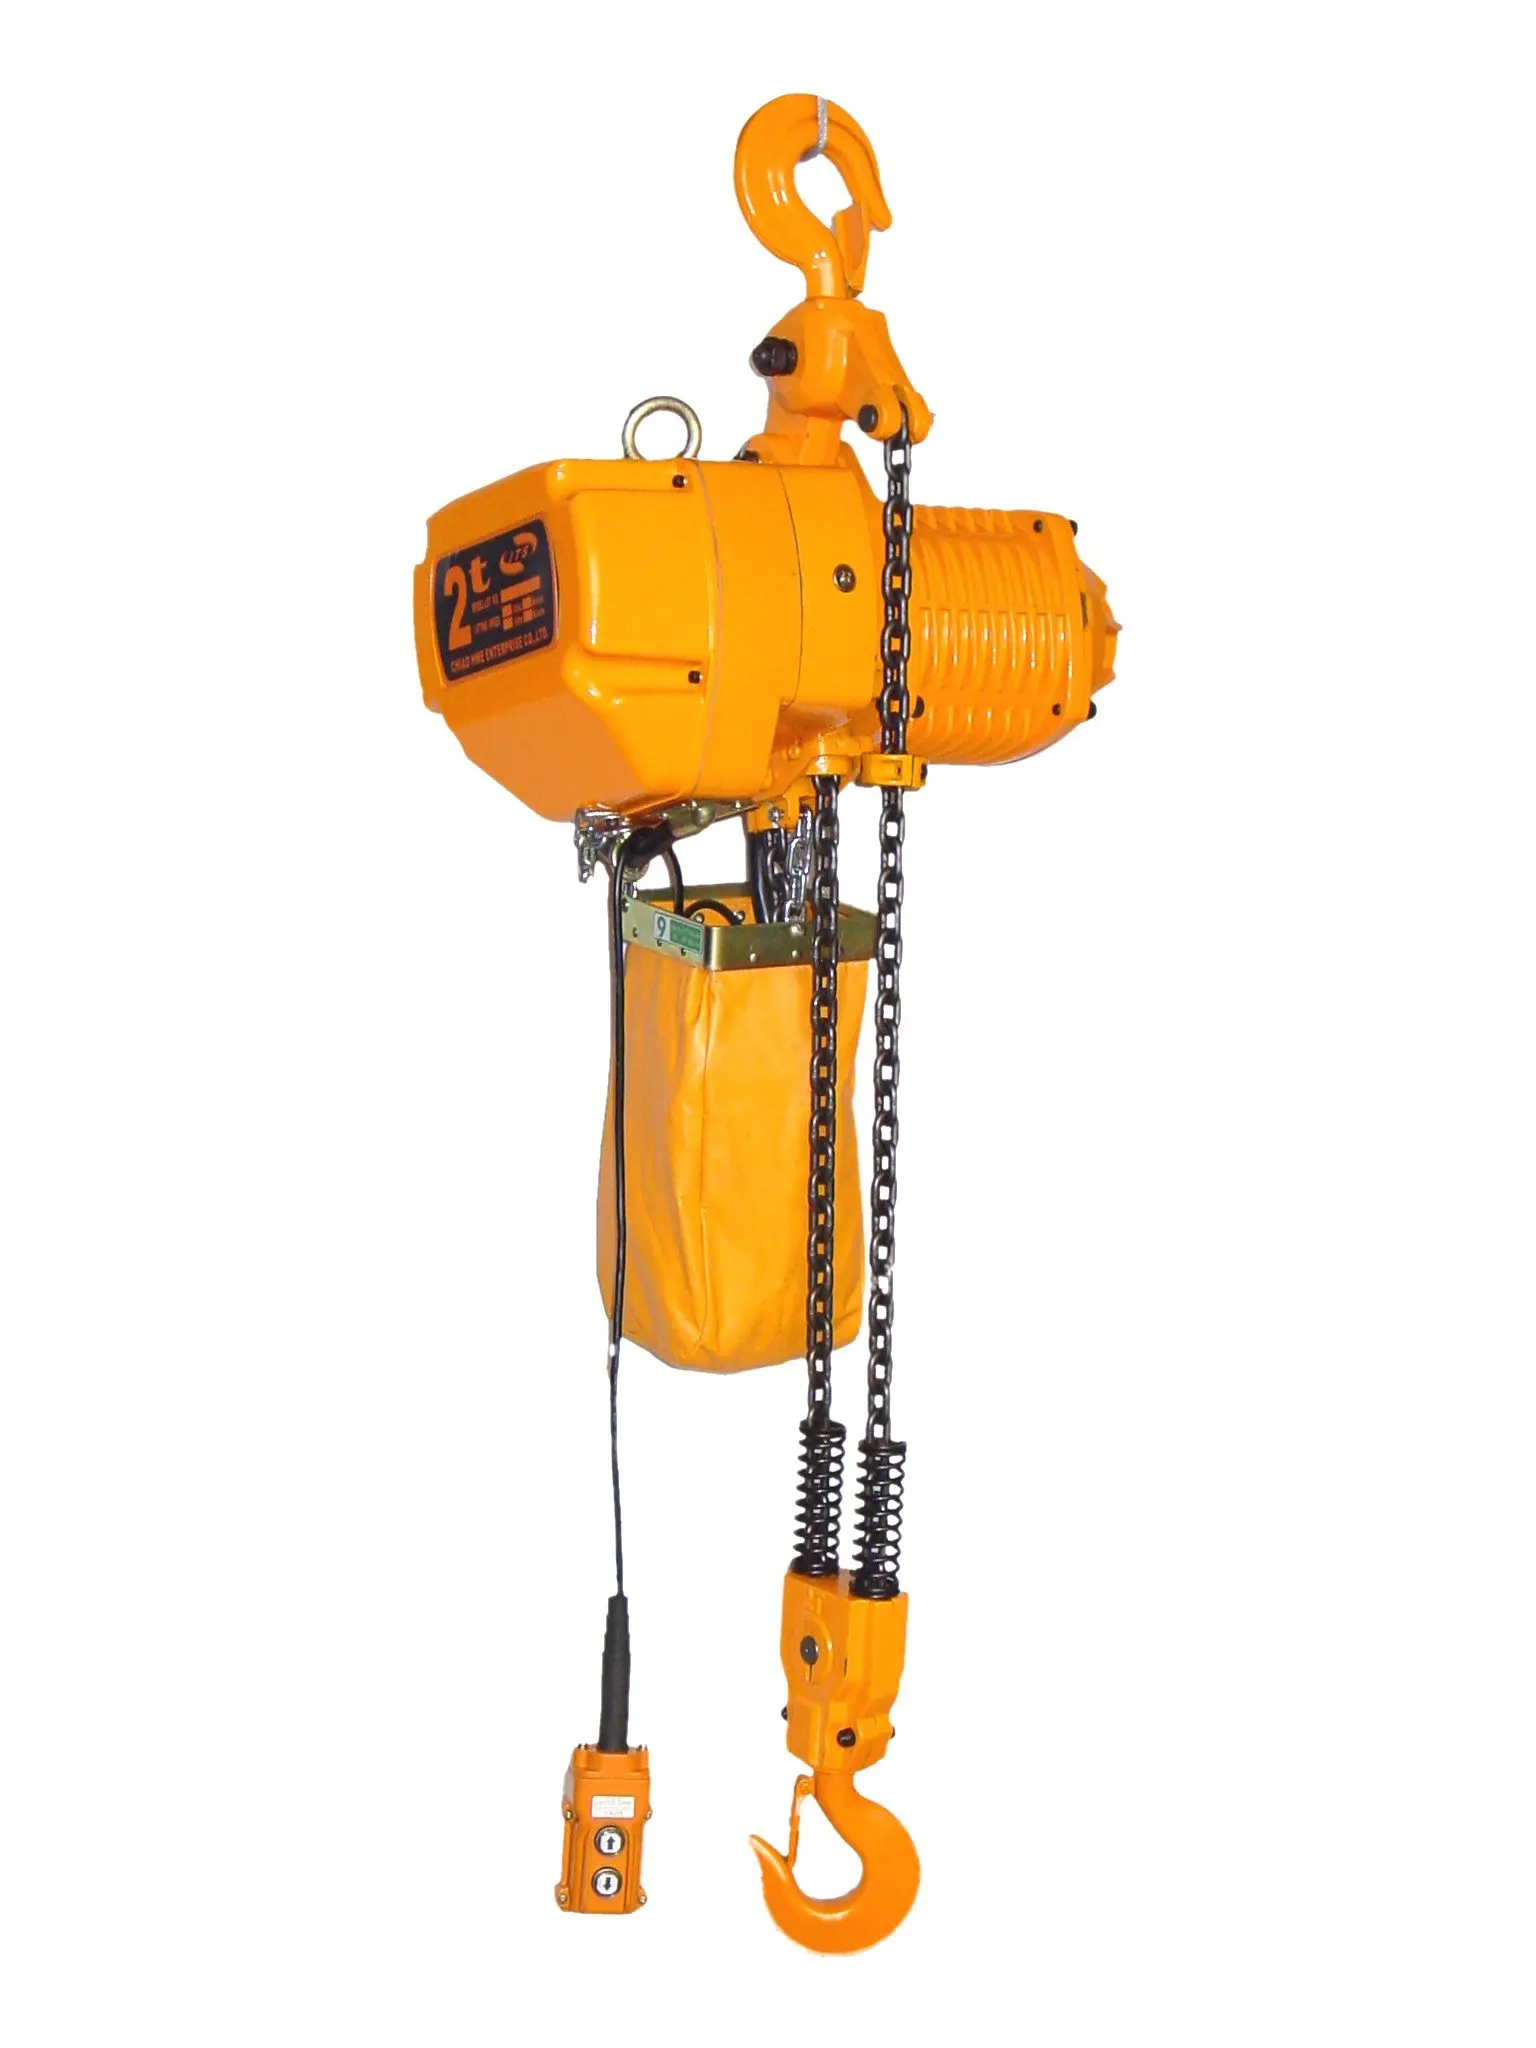 2 Ton Electric Chain Hoist Lifting Tools Pulley Block